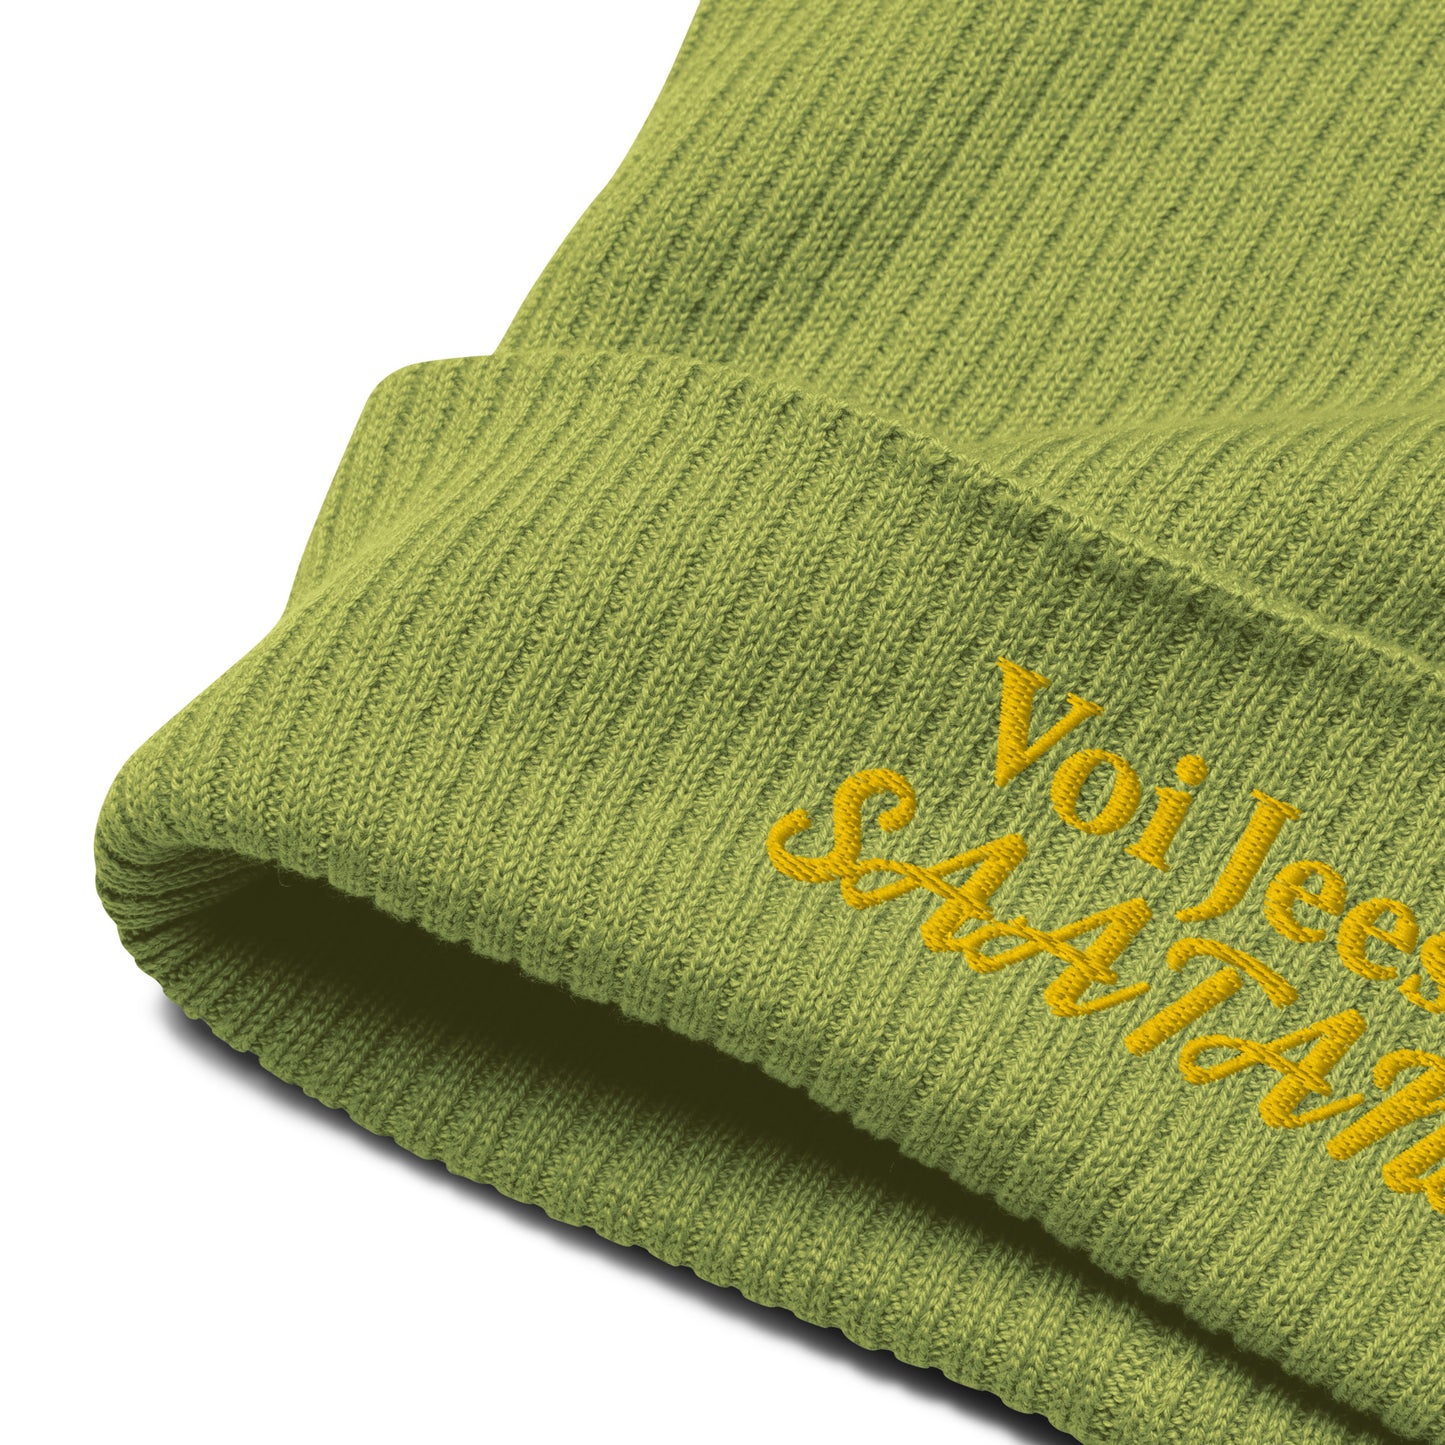 "Oh Jesus" Beanie with embroidery, ecological (customer's request)